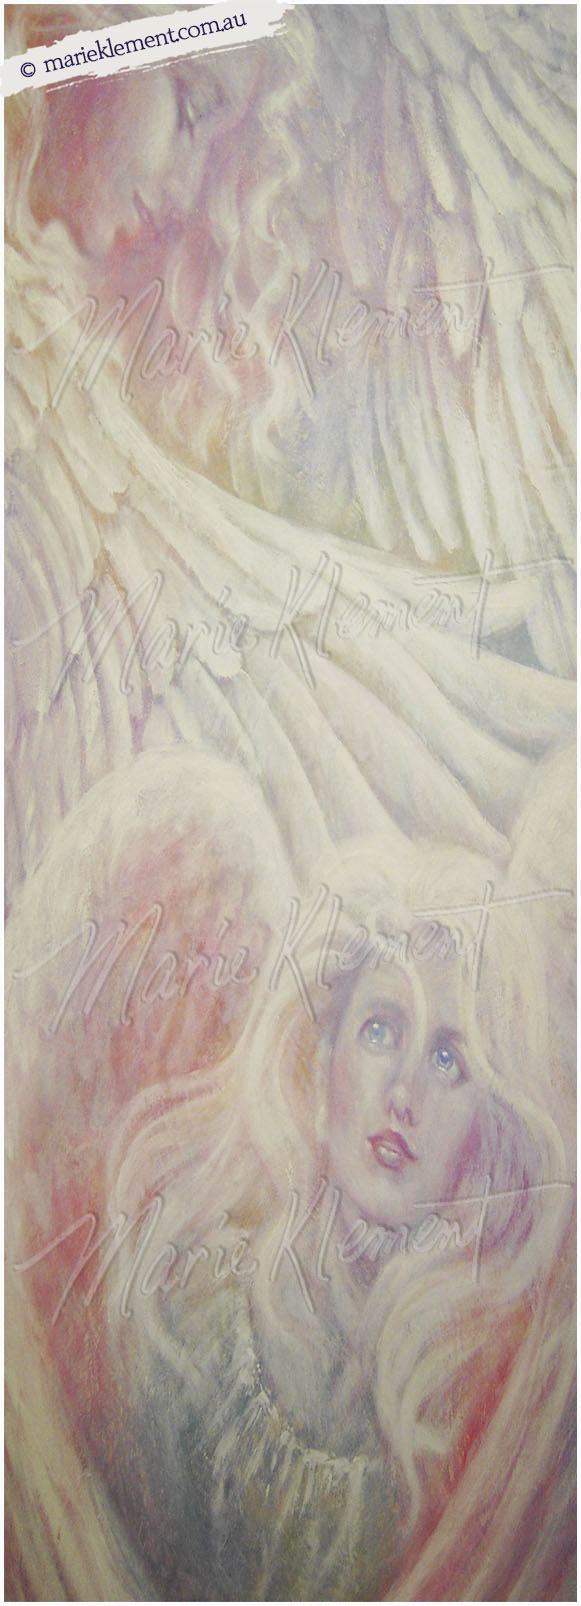 Marie Klement Artist Two Angels Painting